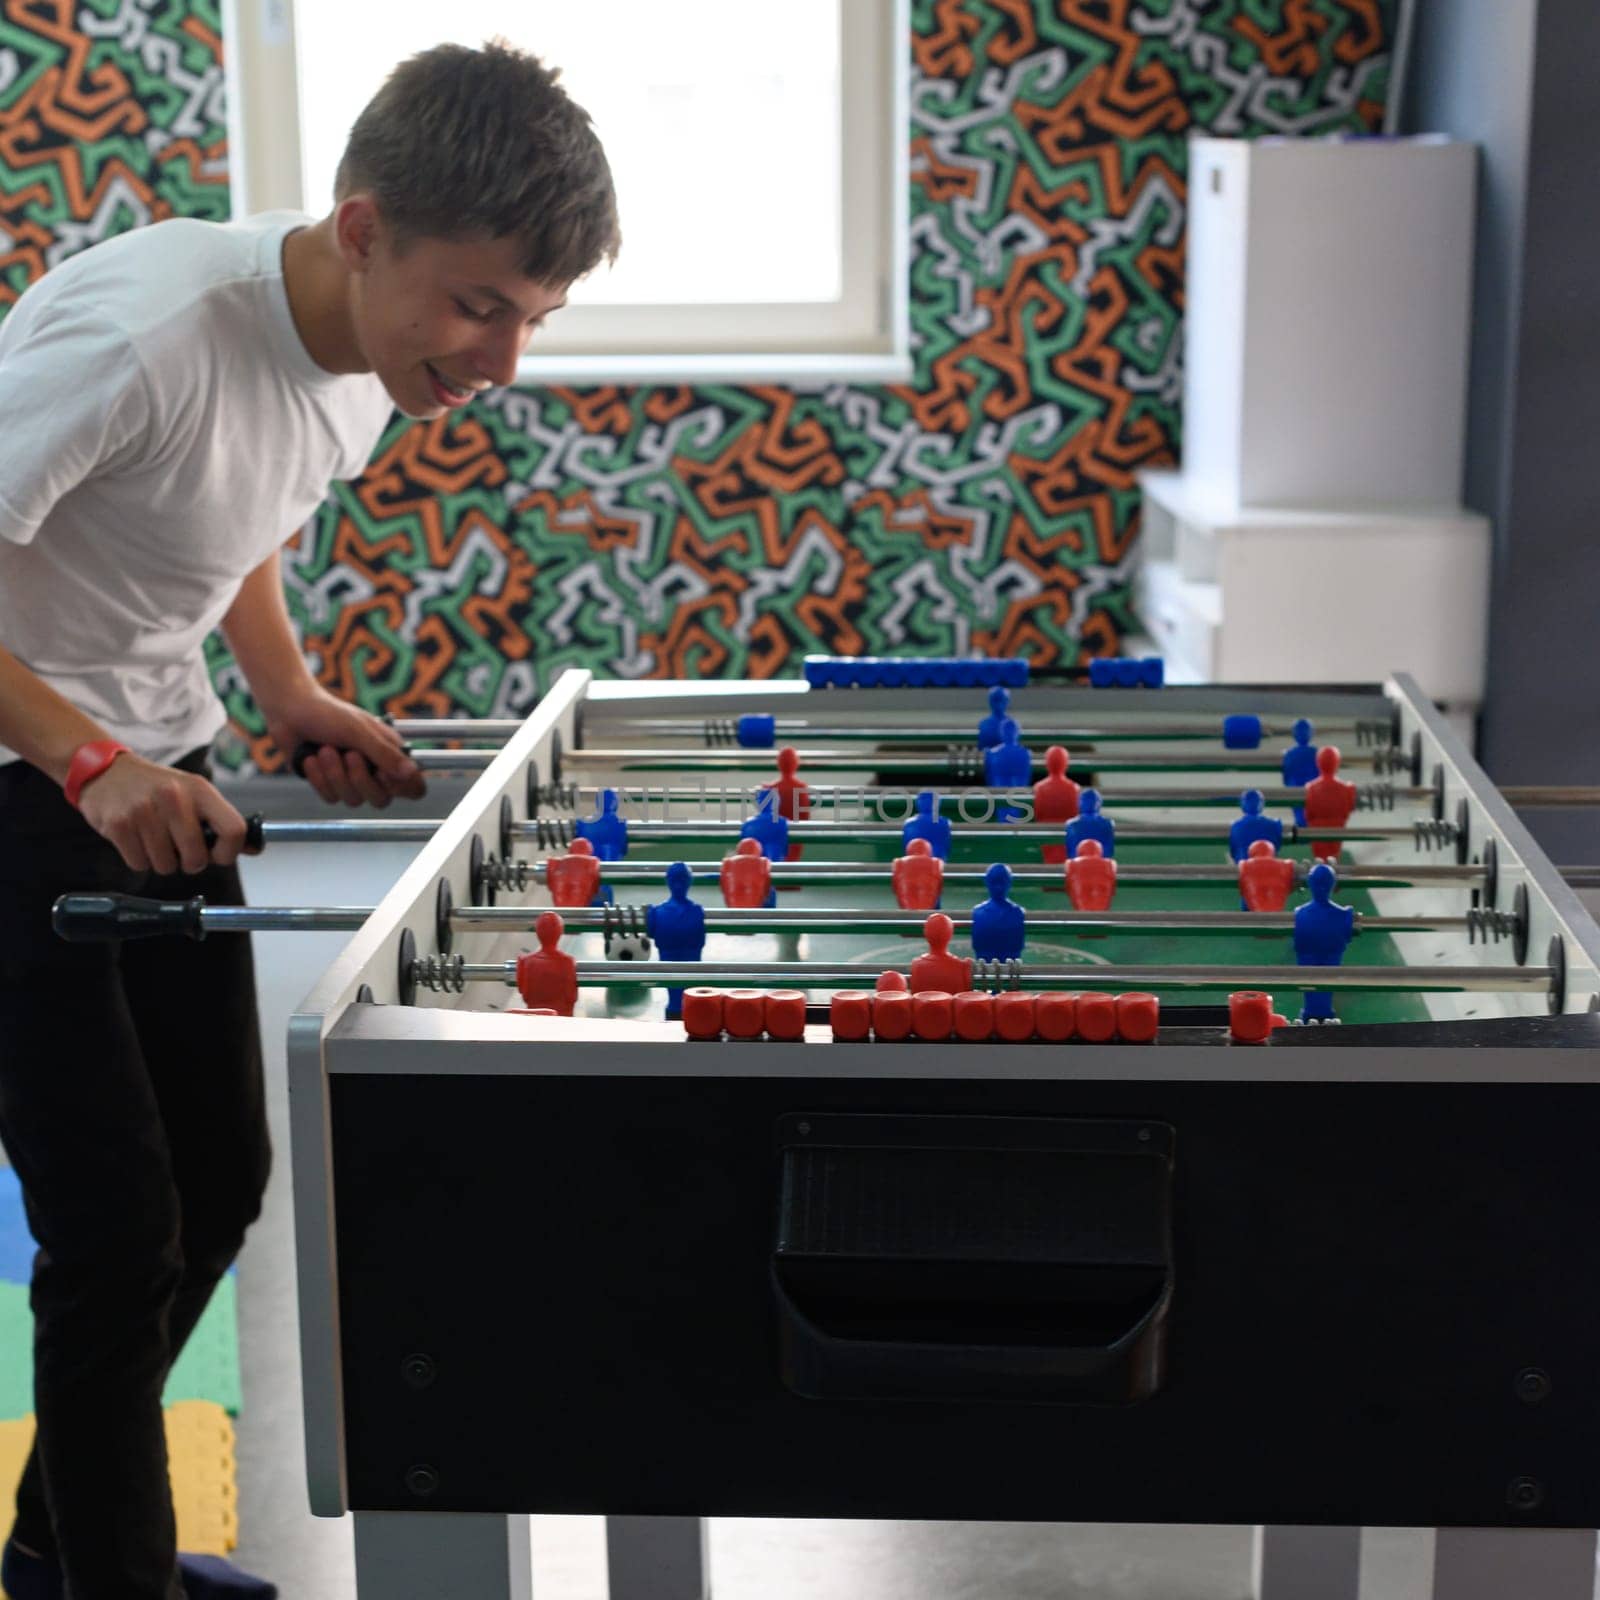 Active recreation in the game room, children play table football. by Niko_Cingaryuk